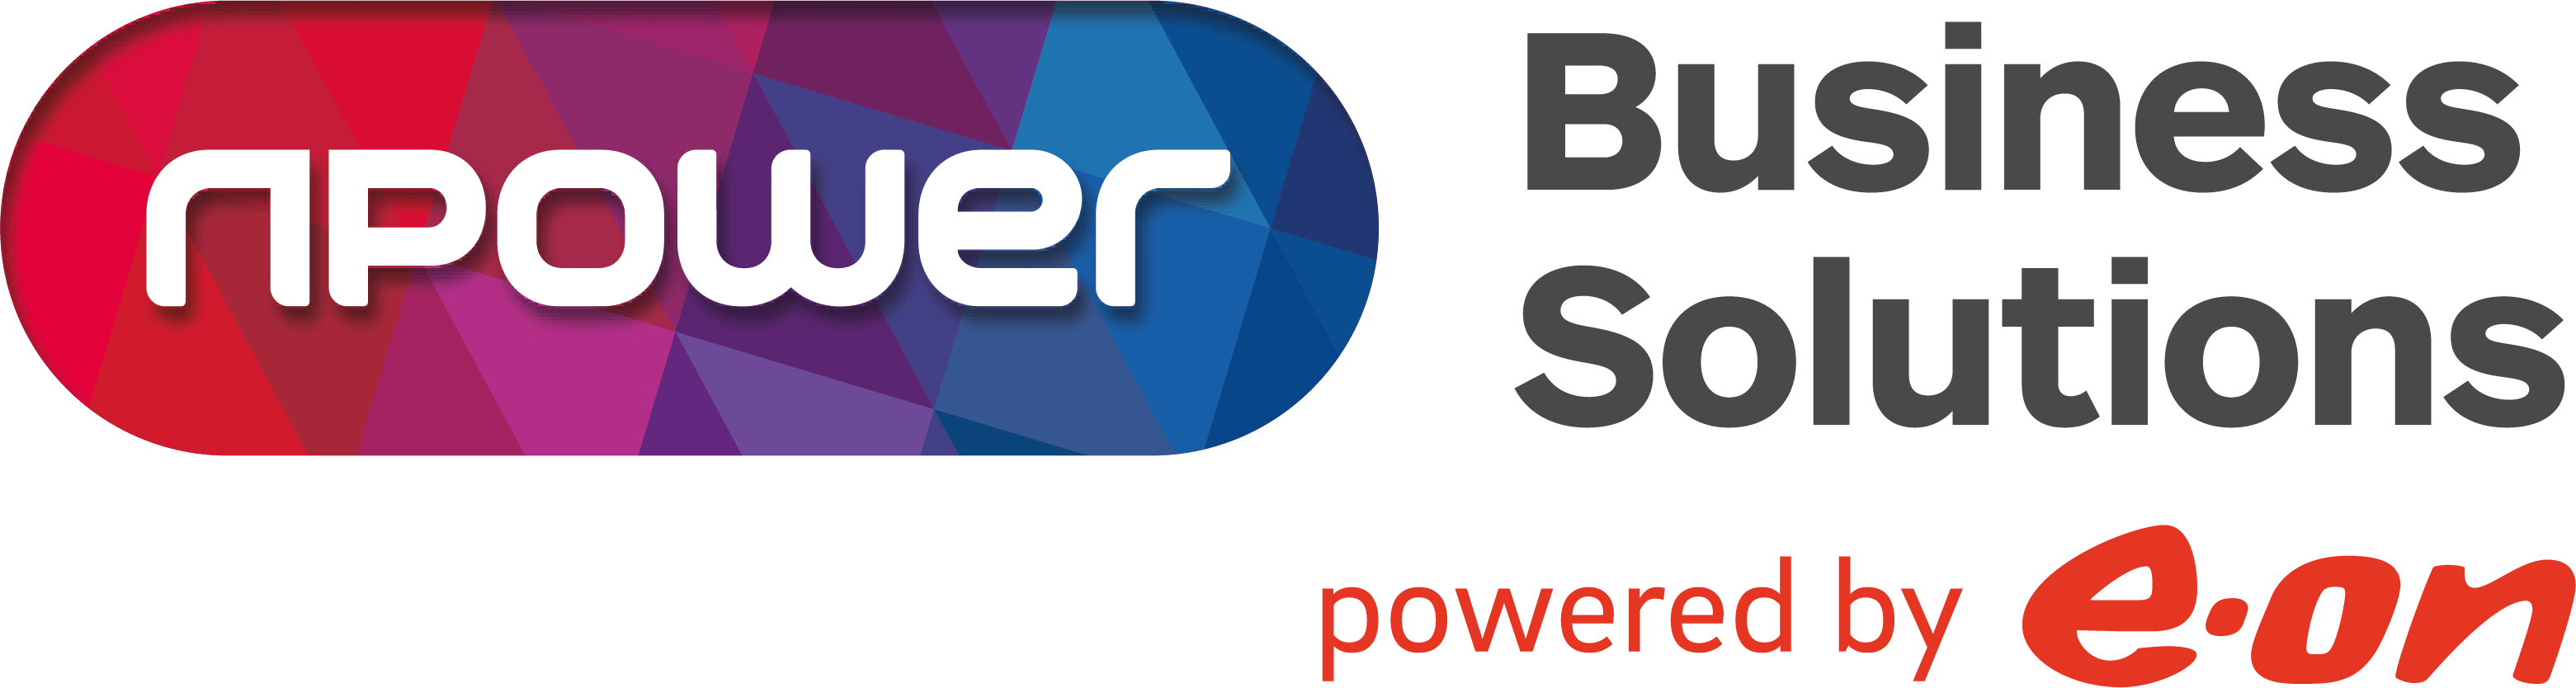 npower business solutions powered by Eon